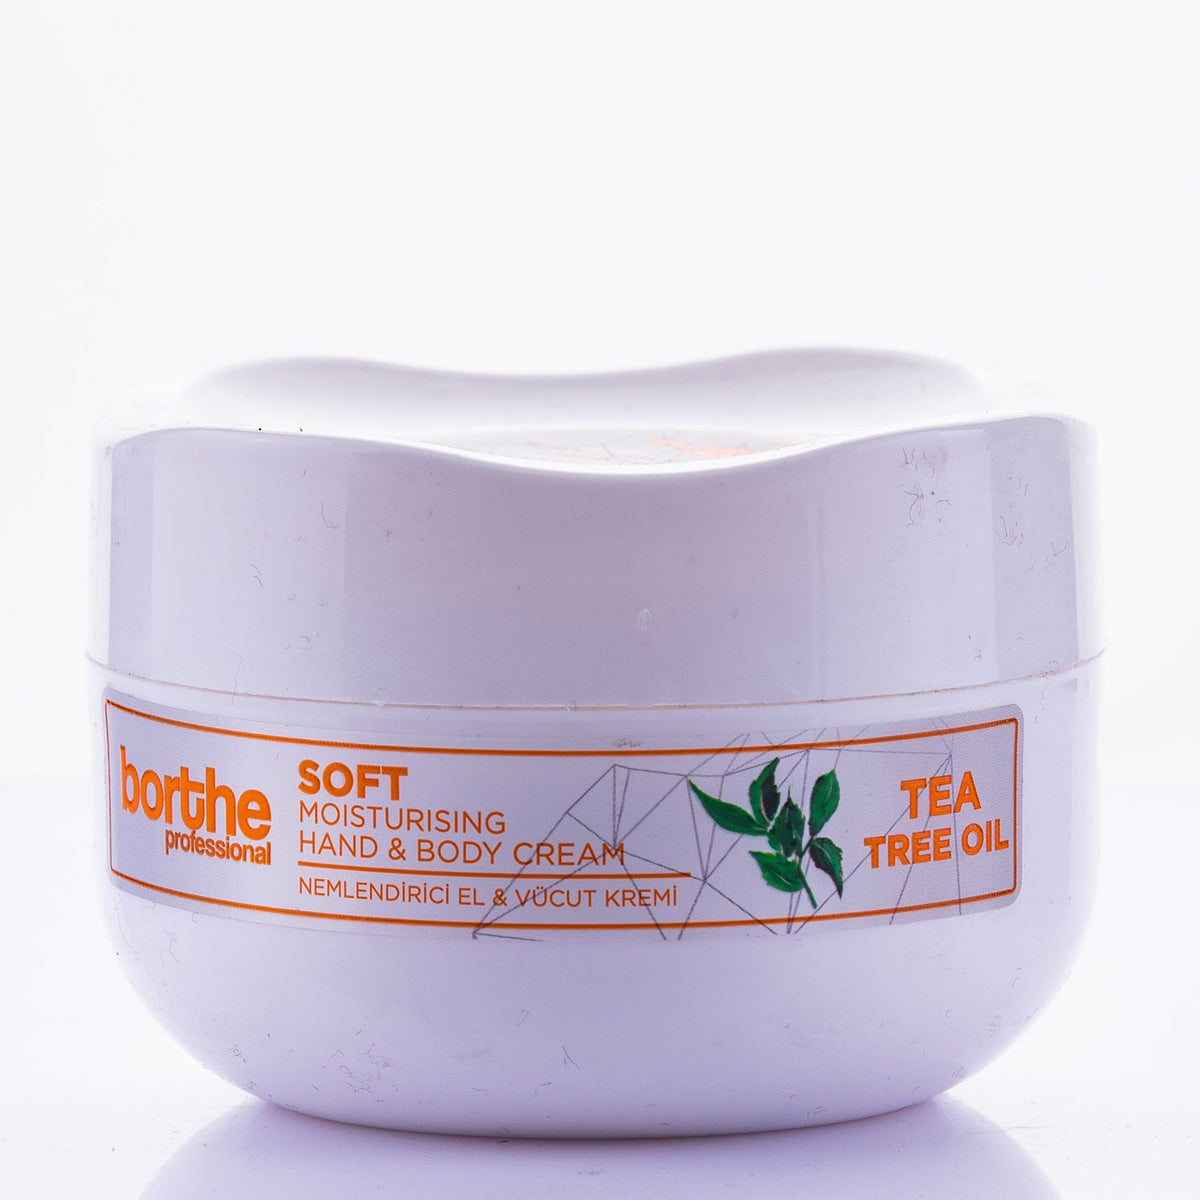 BORTHE Hand &amp; Body Cream TEA TREE OIL Ultra Hydrating Formula, For Normal To Dry Hands, Fast Absorbing &amp; Non Greasy 300ml